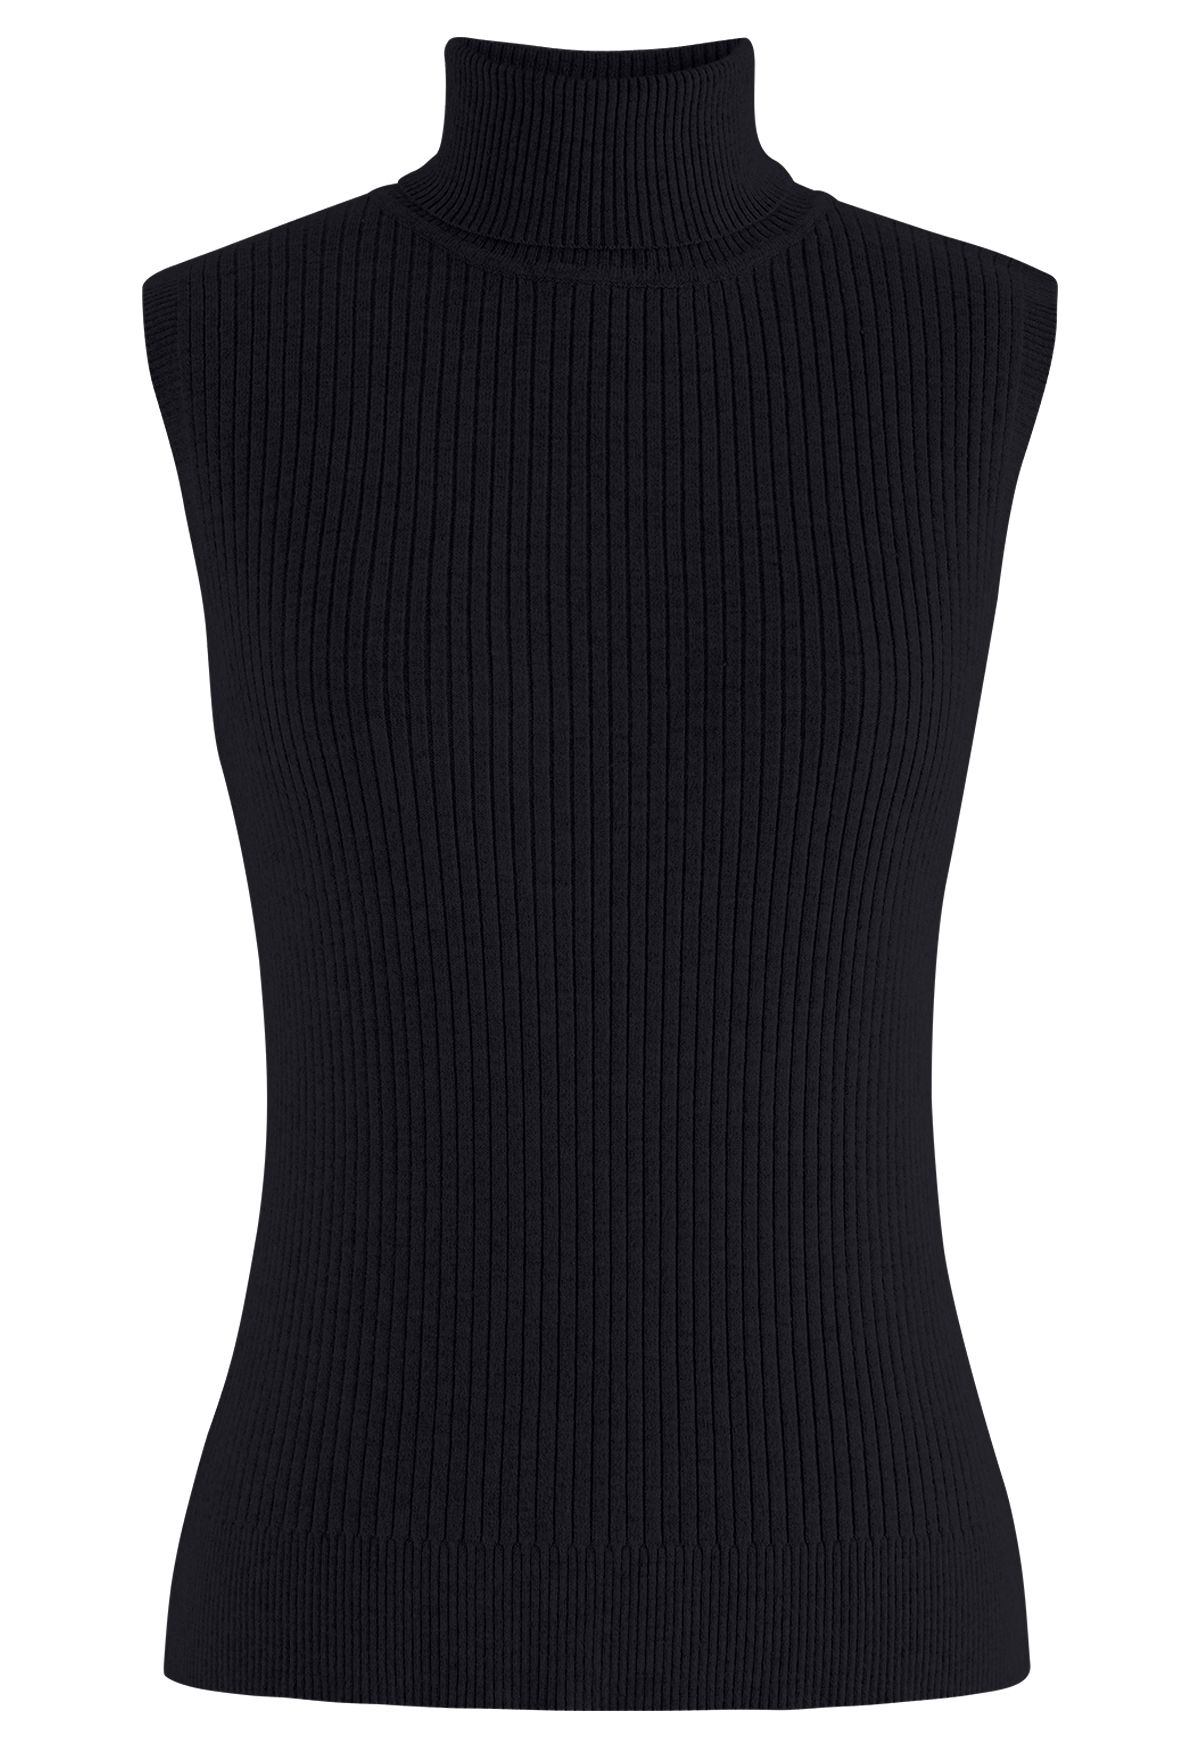 Turtleneck Soft Knit Sleeveless Top in Black - Retro, Indie and Unique ...